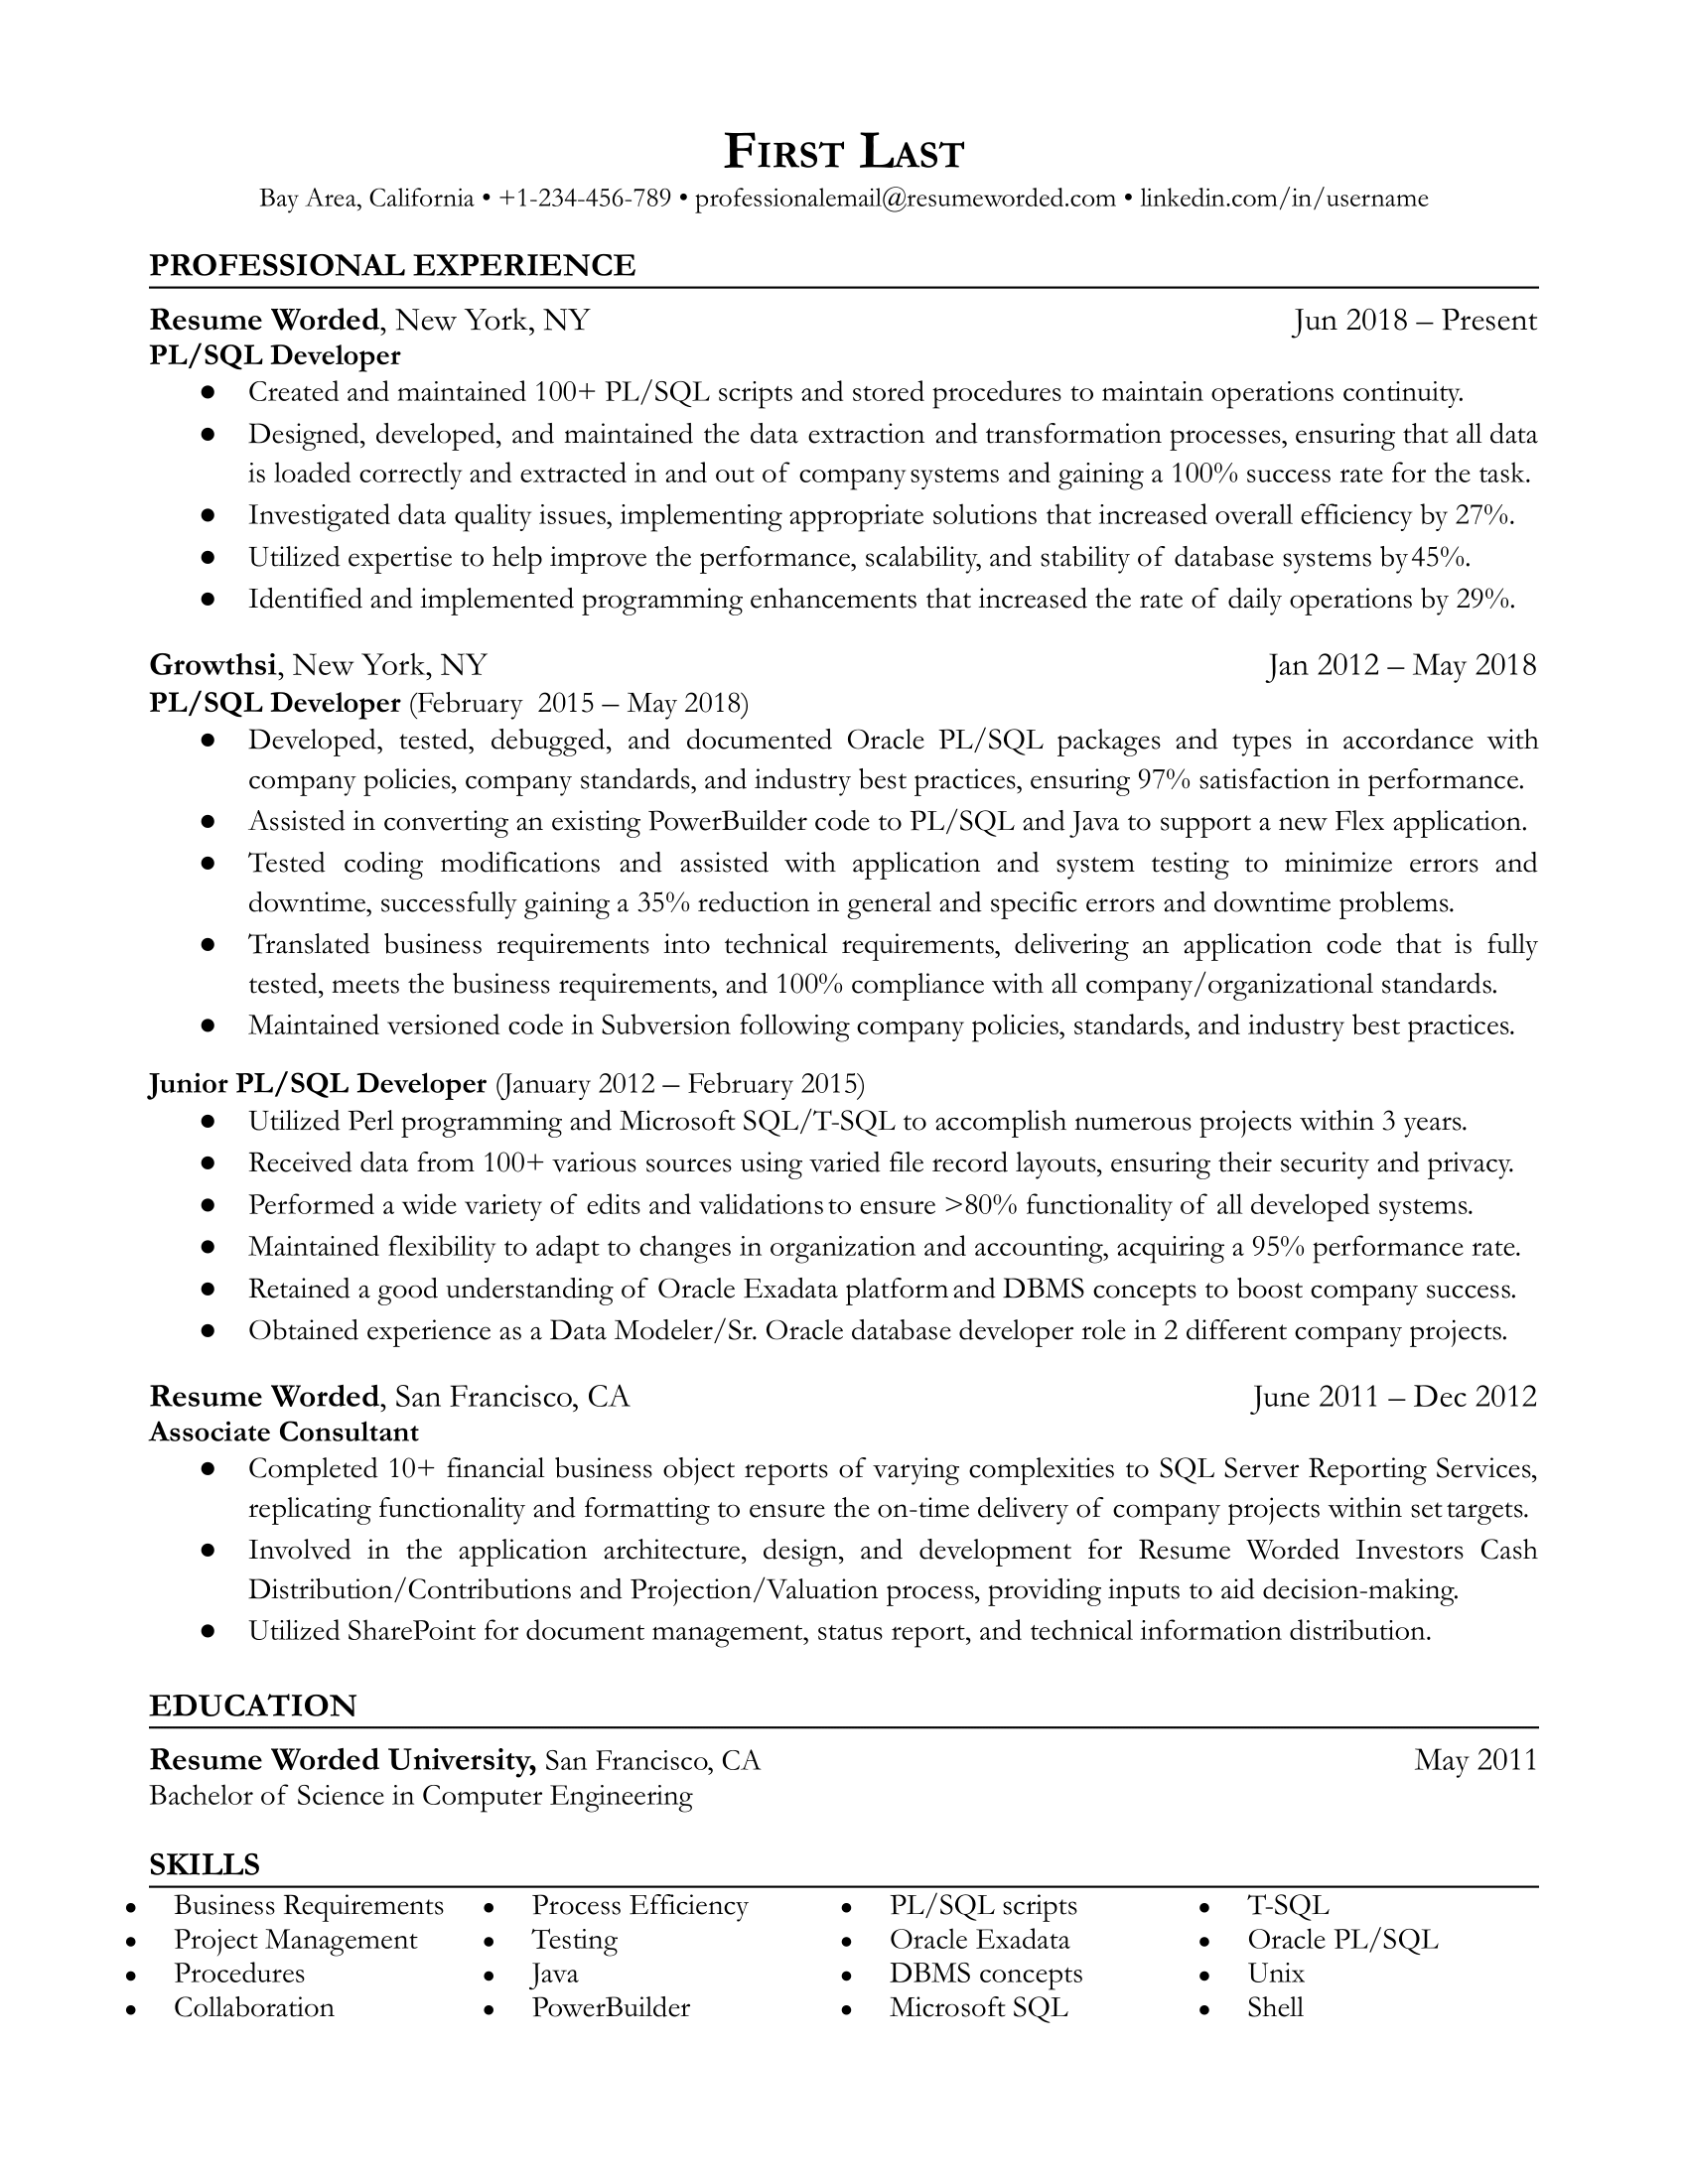 A resume for a PL/SQL developer with a degree in computer engineering and prior experience as a junior PL/SQL developer.